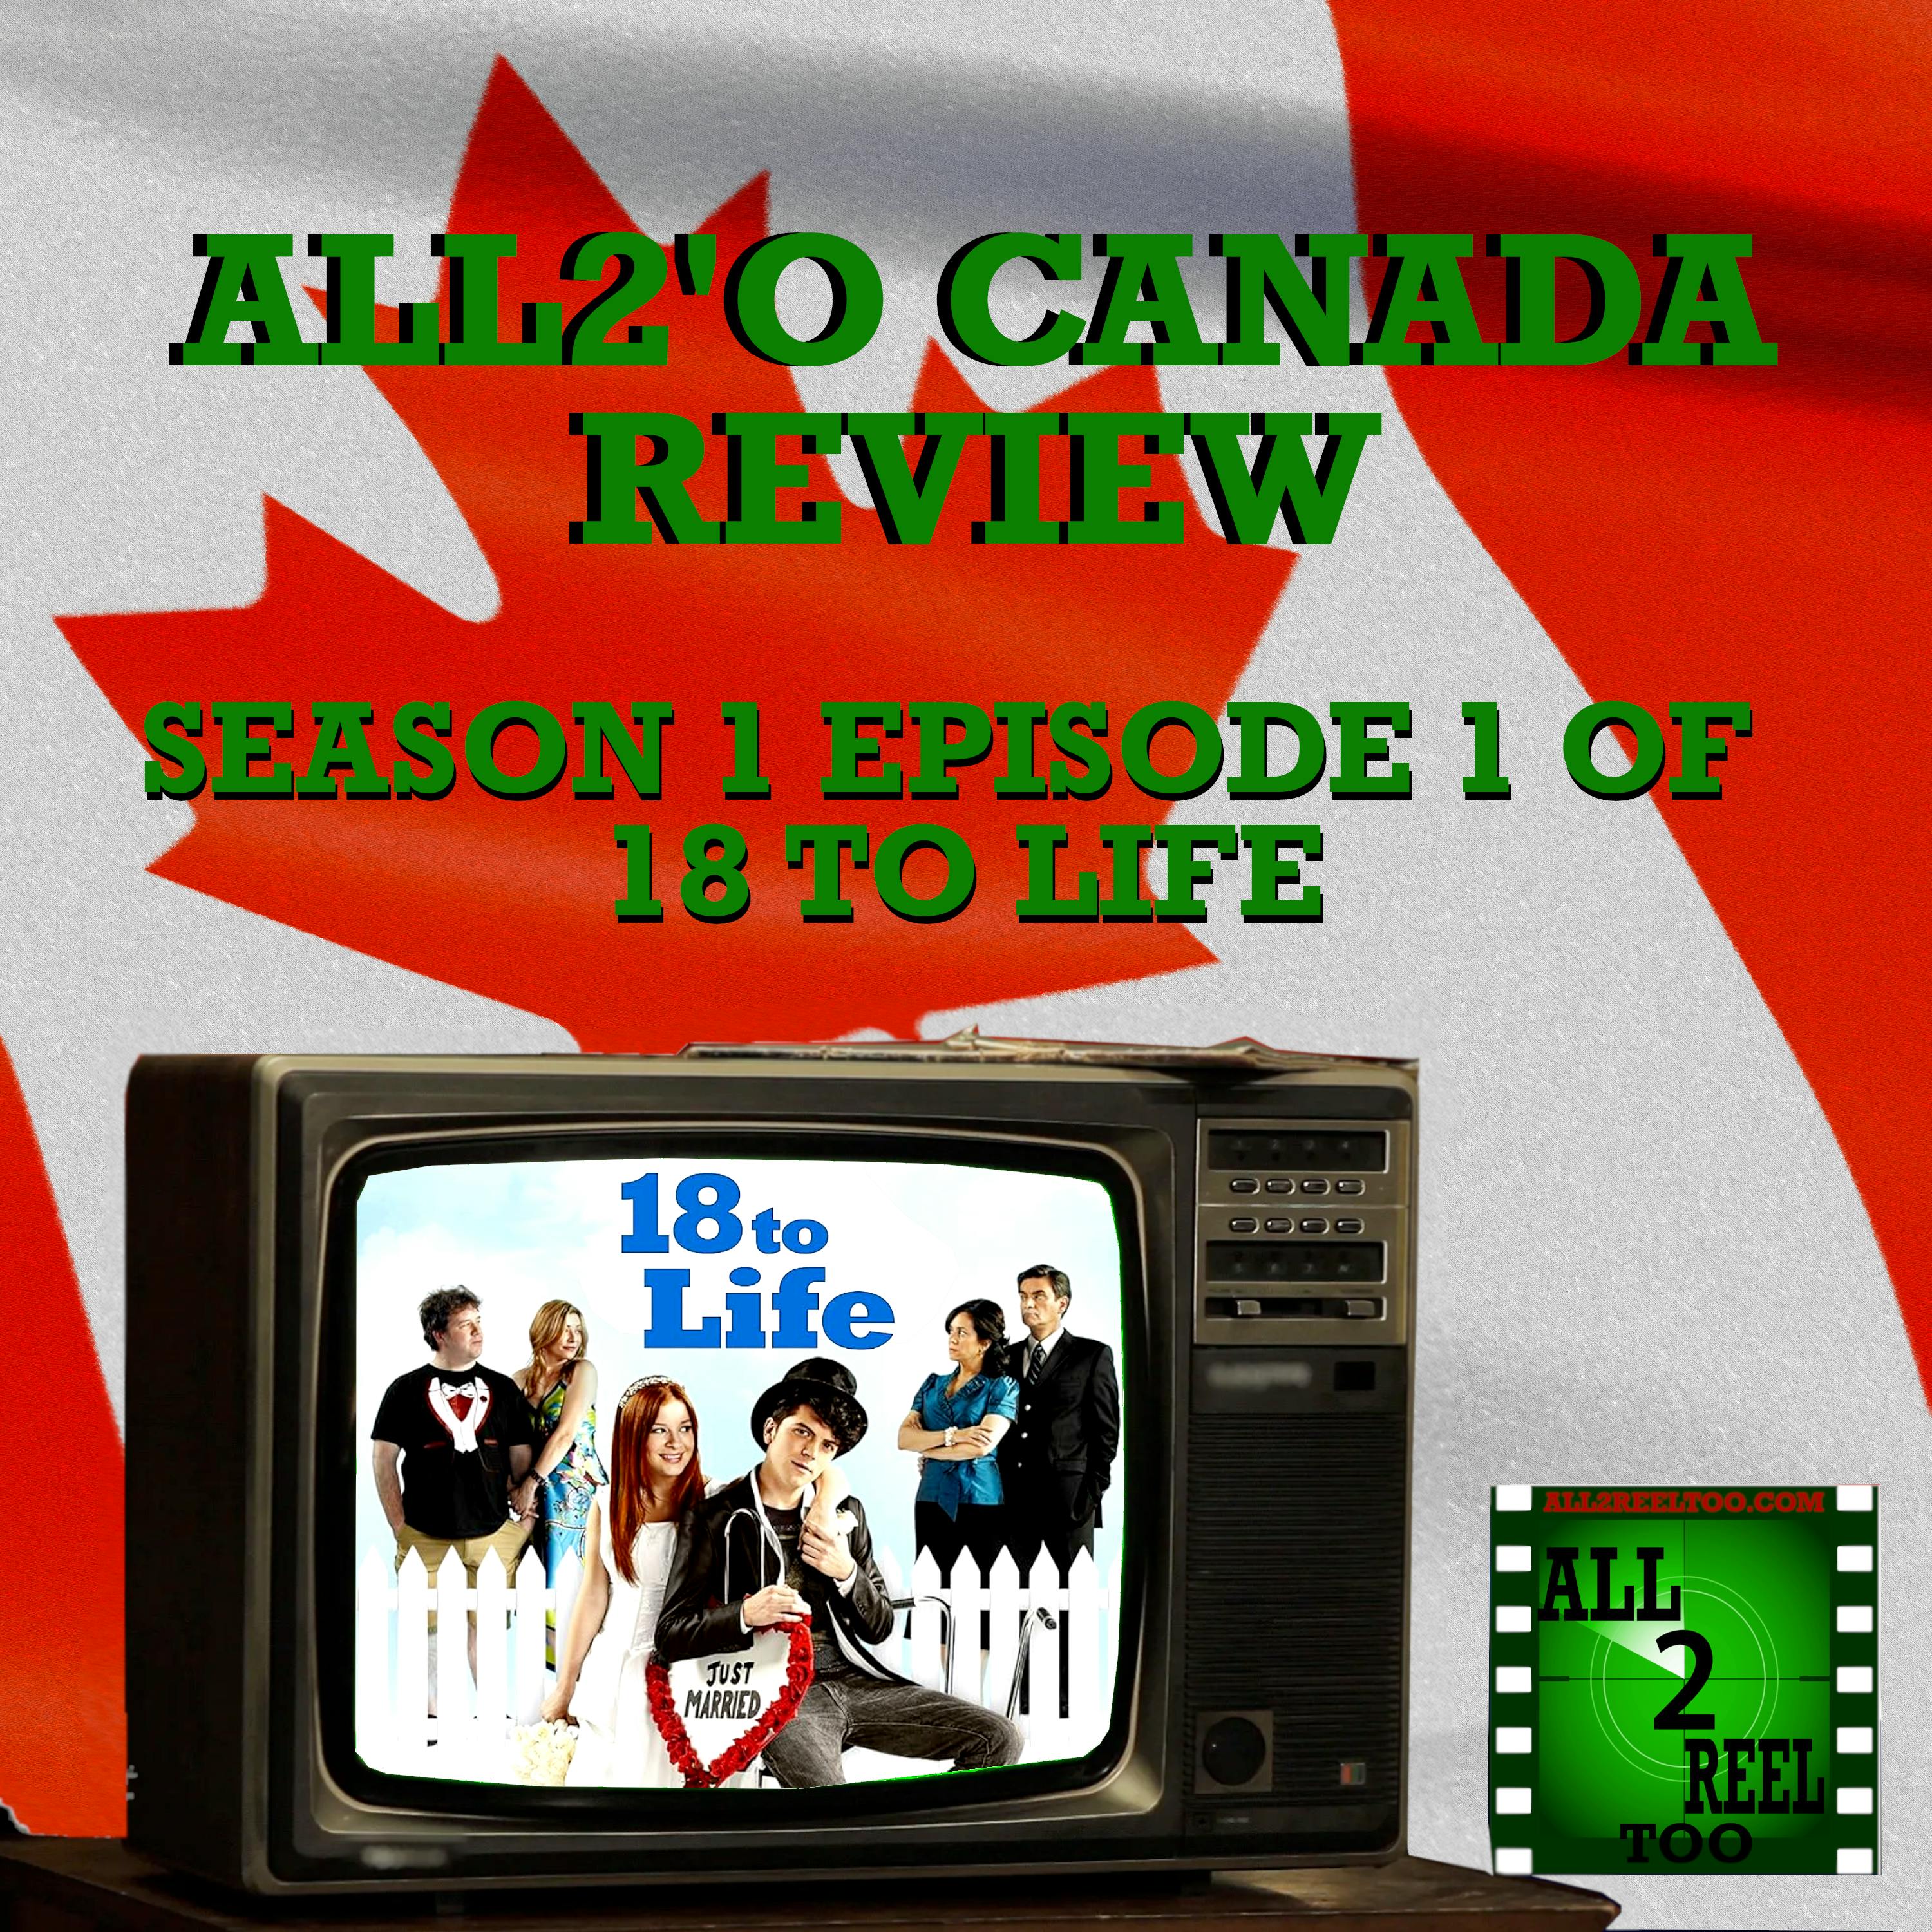 18 to Life (2010) S1EP1- All2’O CANADA Review